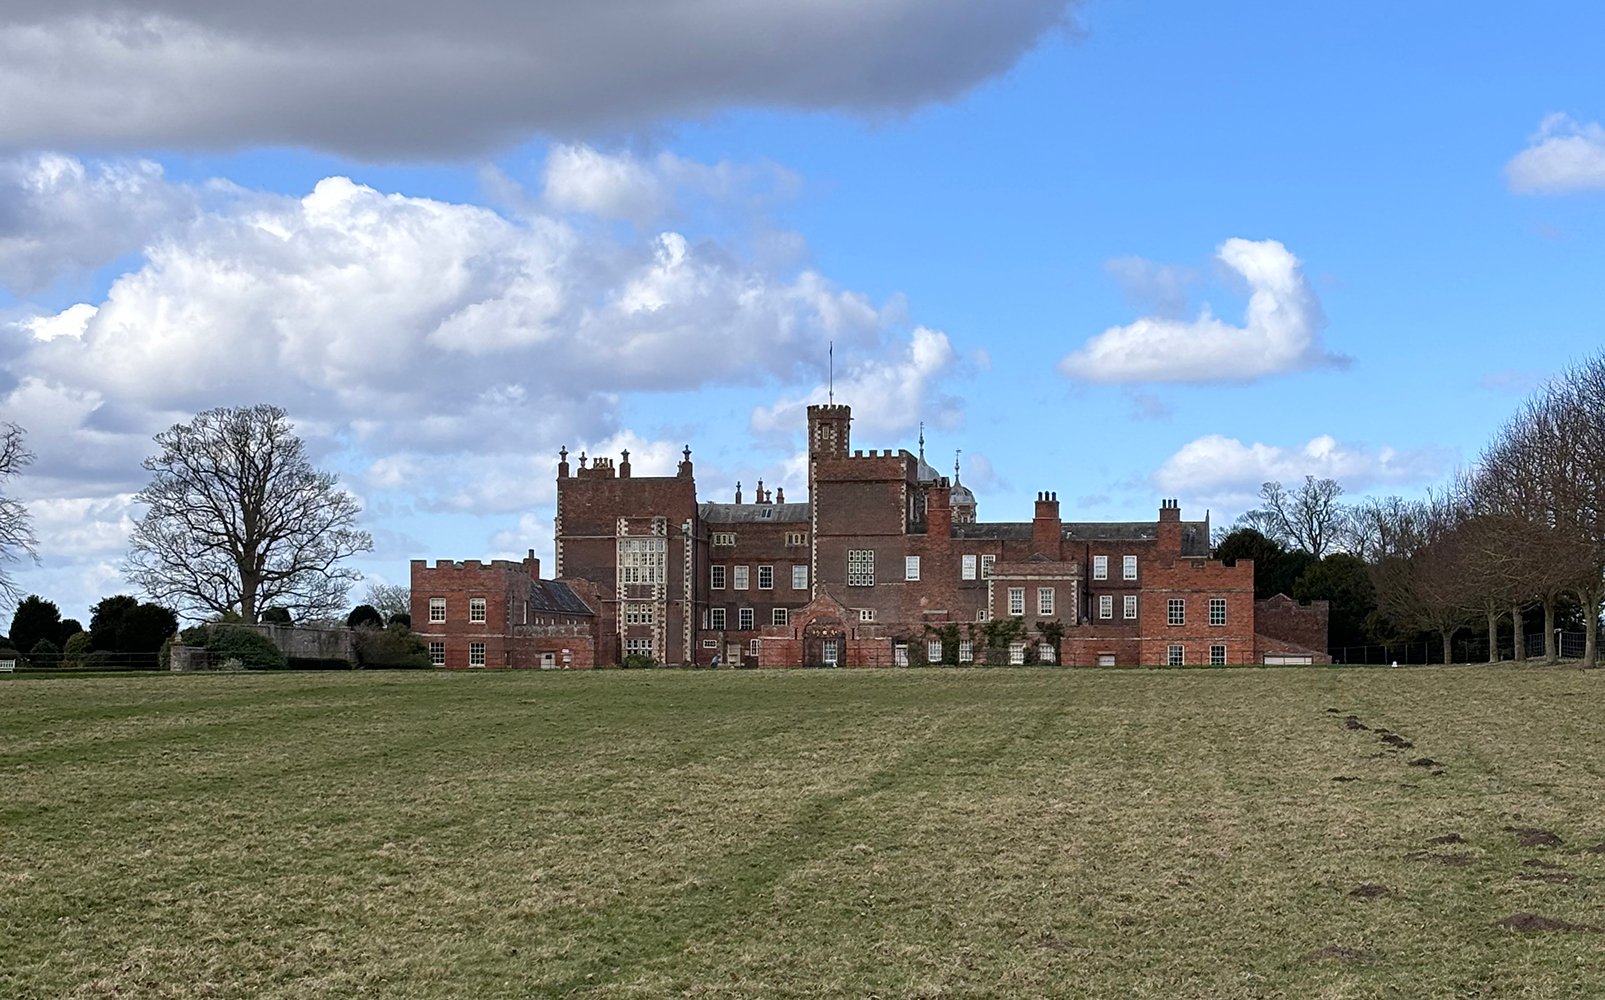 Image name burton constable hall red bricks blue sky and clouds east yorkshire the 14 image from the post A look at the history of Burton Constable Hall, with Dr Emma Wells in Yorkshire.com.